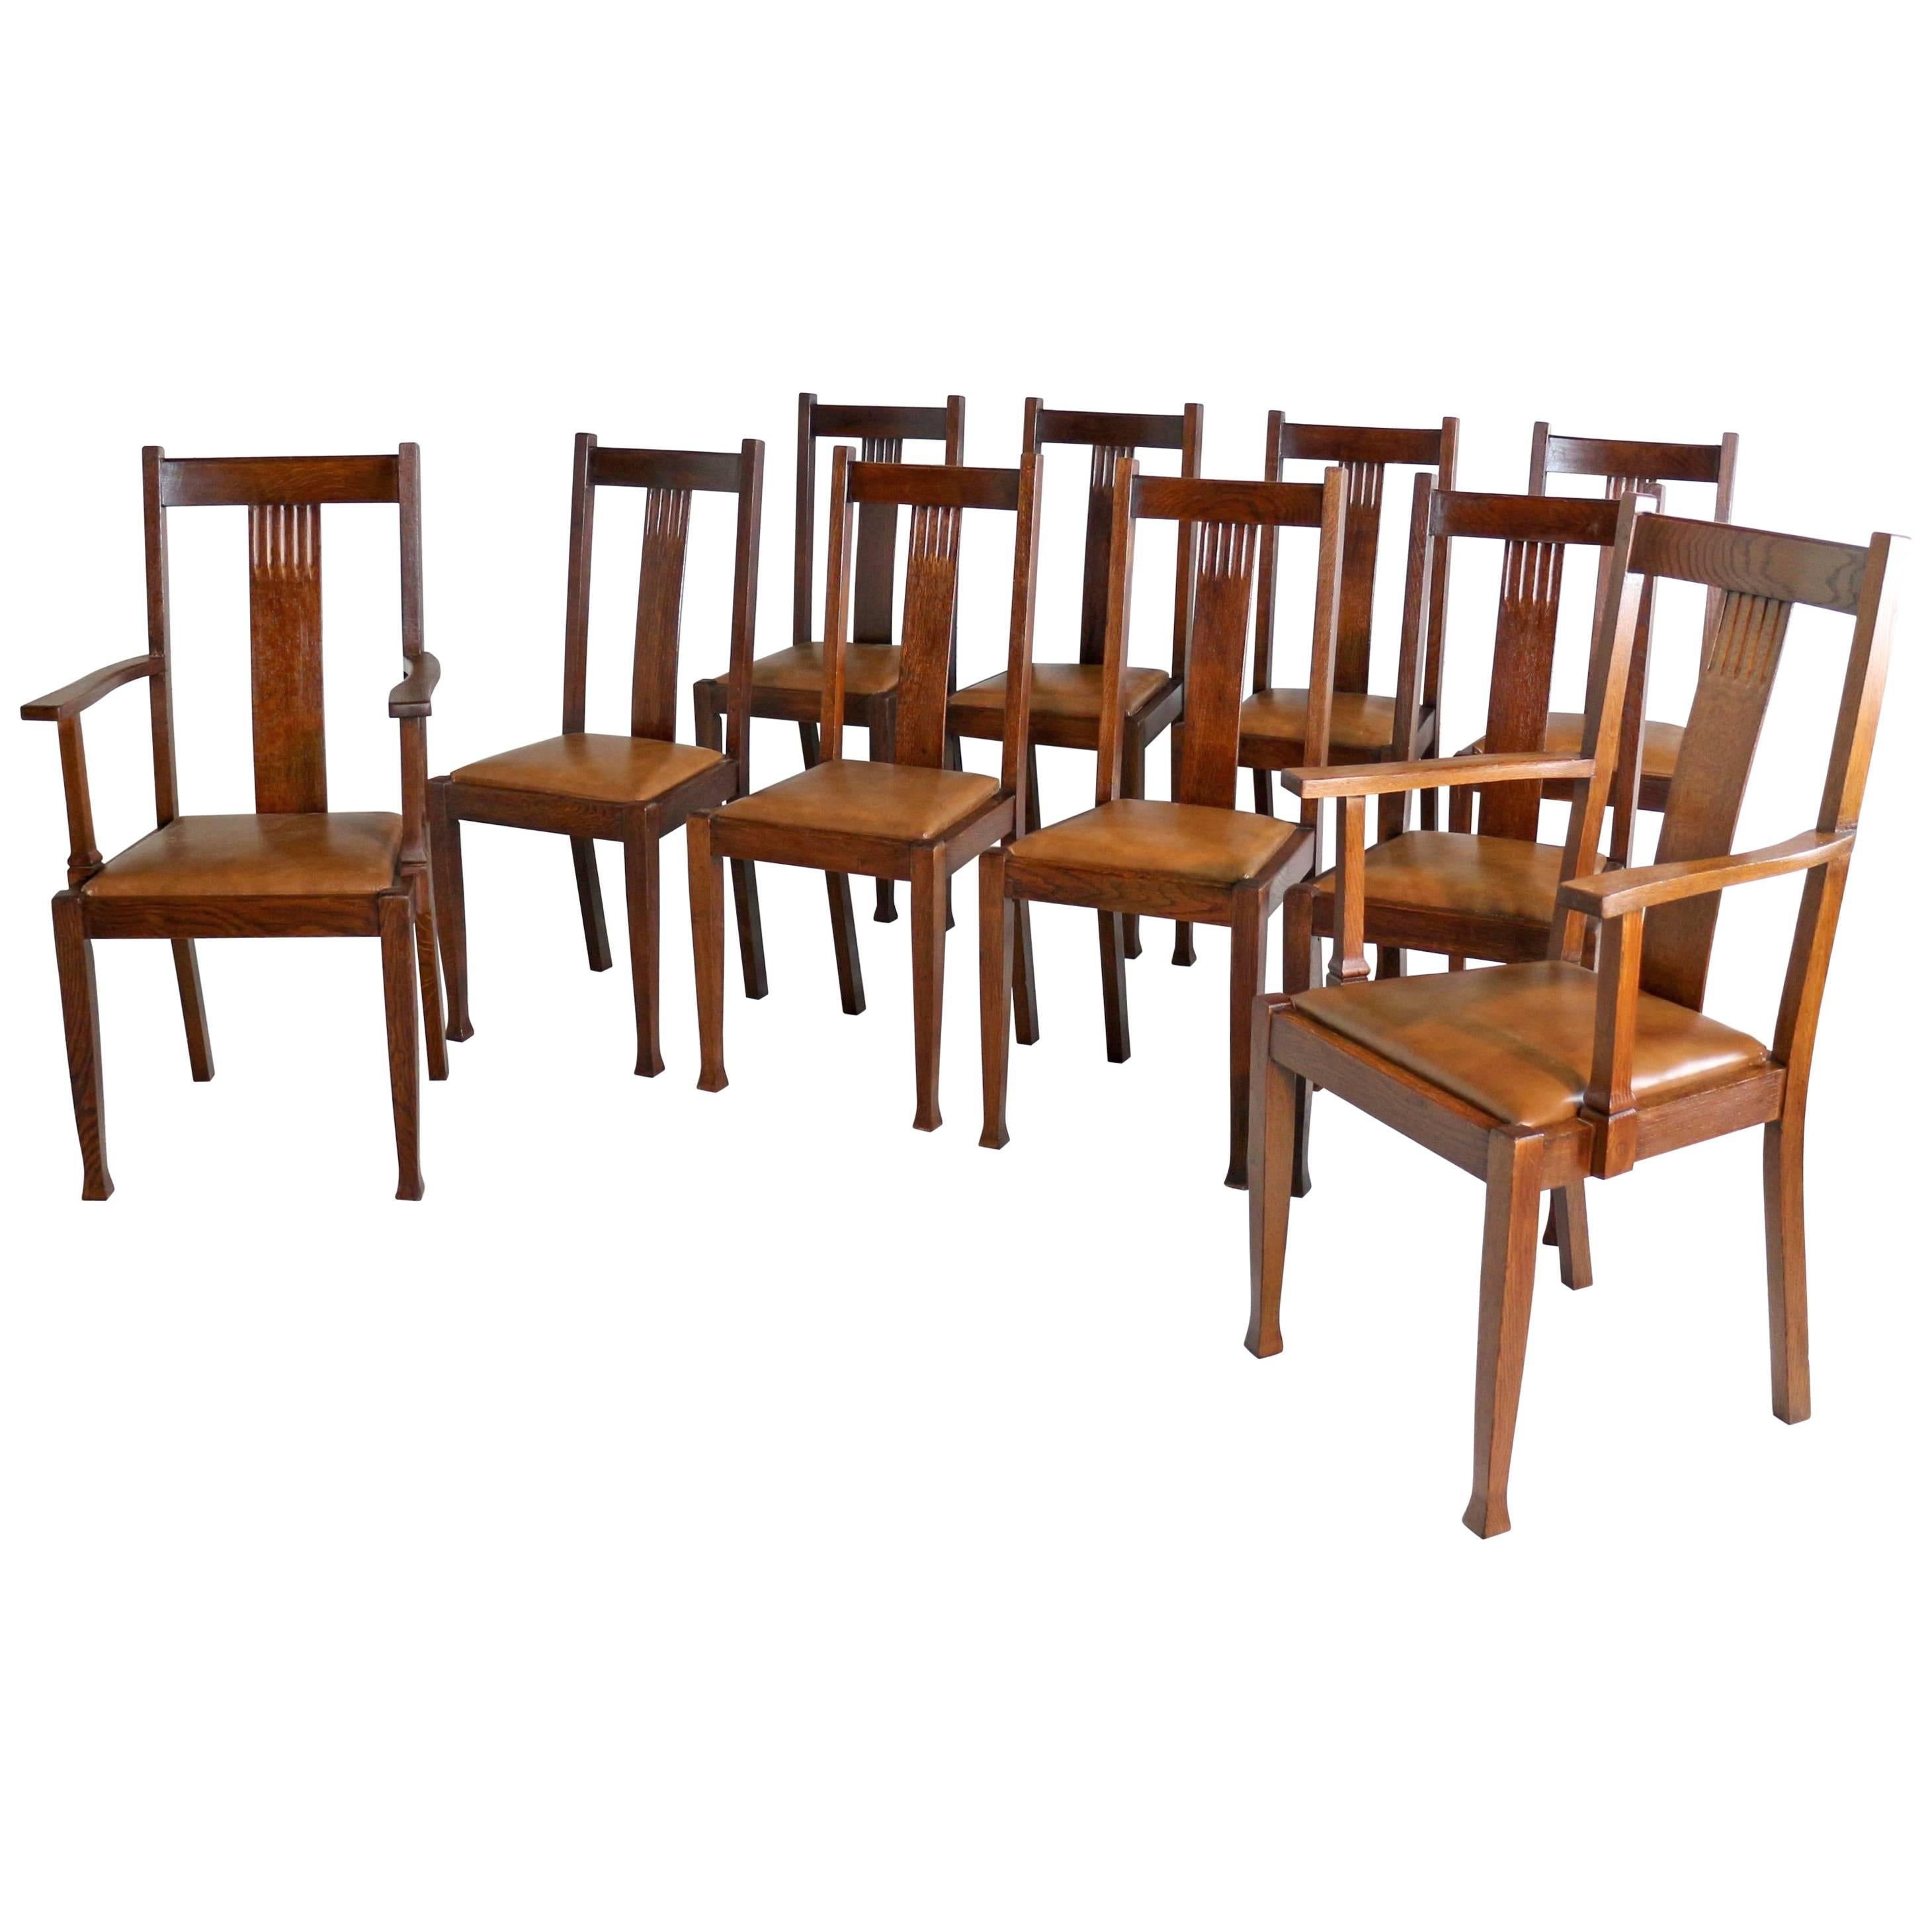 Set of Ten Arts & Crafts Oak Dining Chairs with Leather Seats